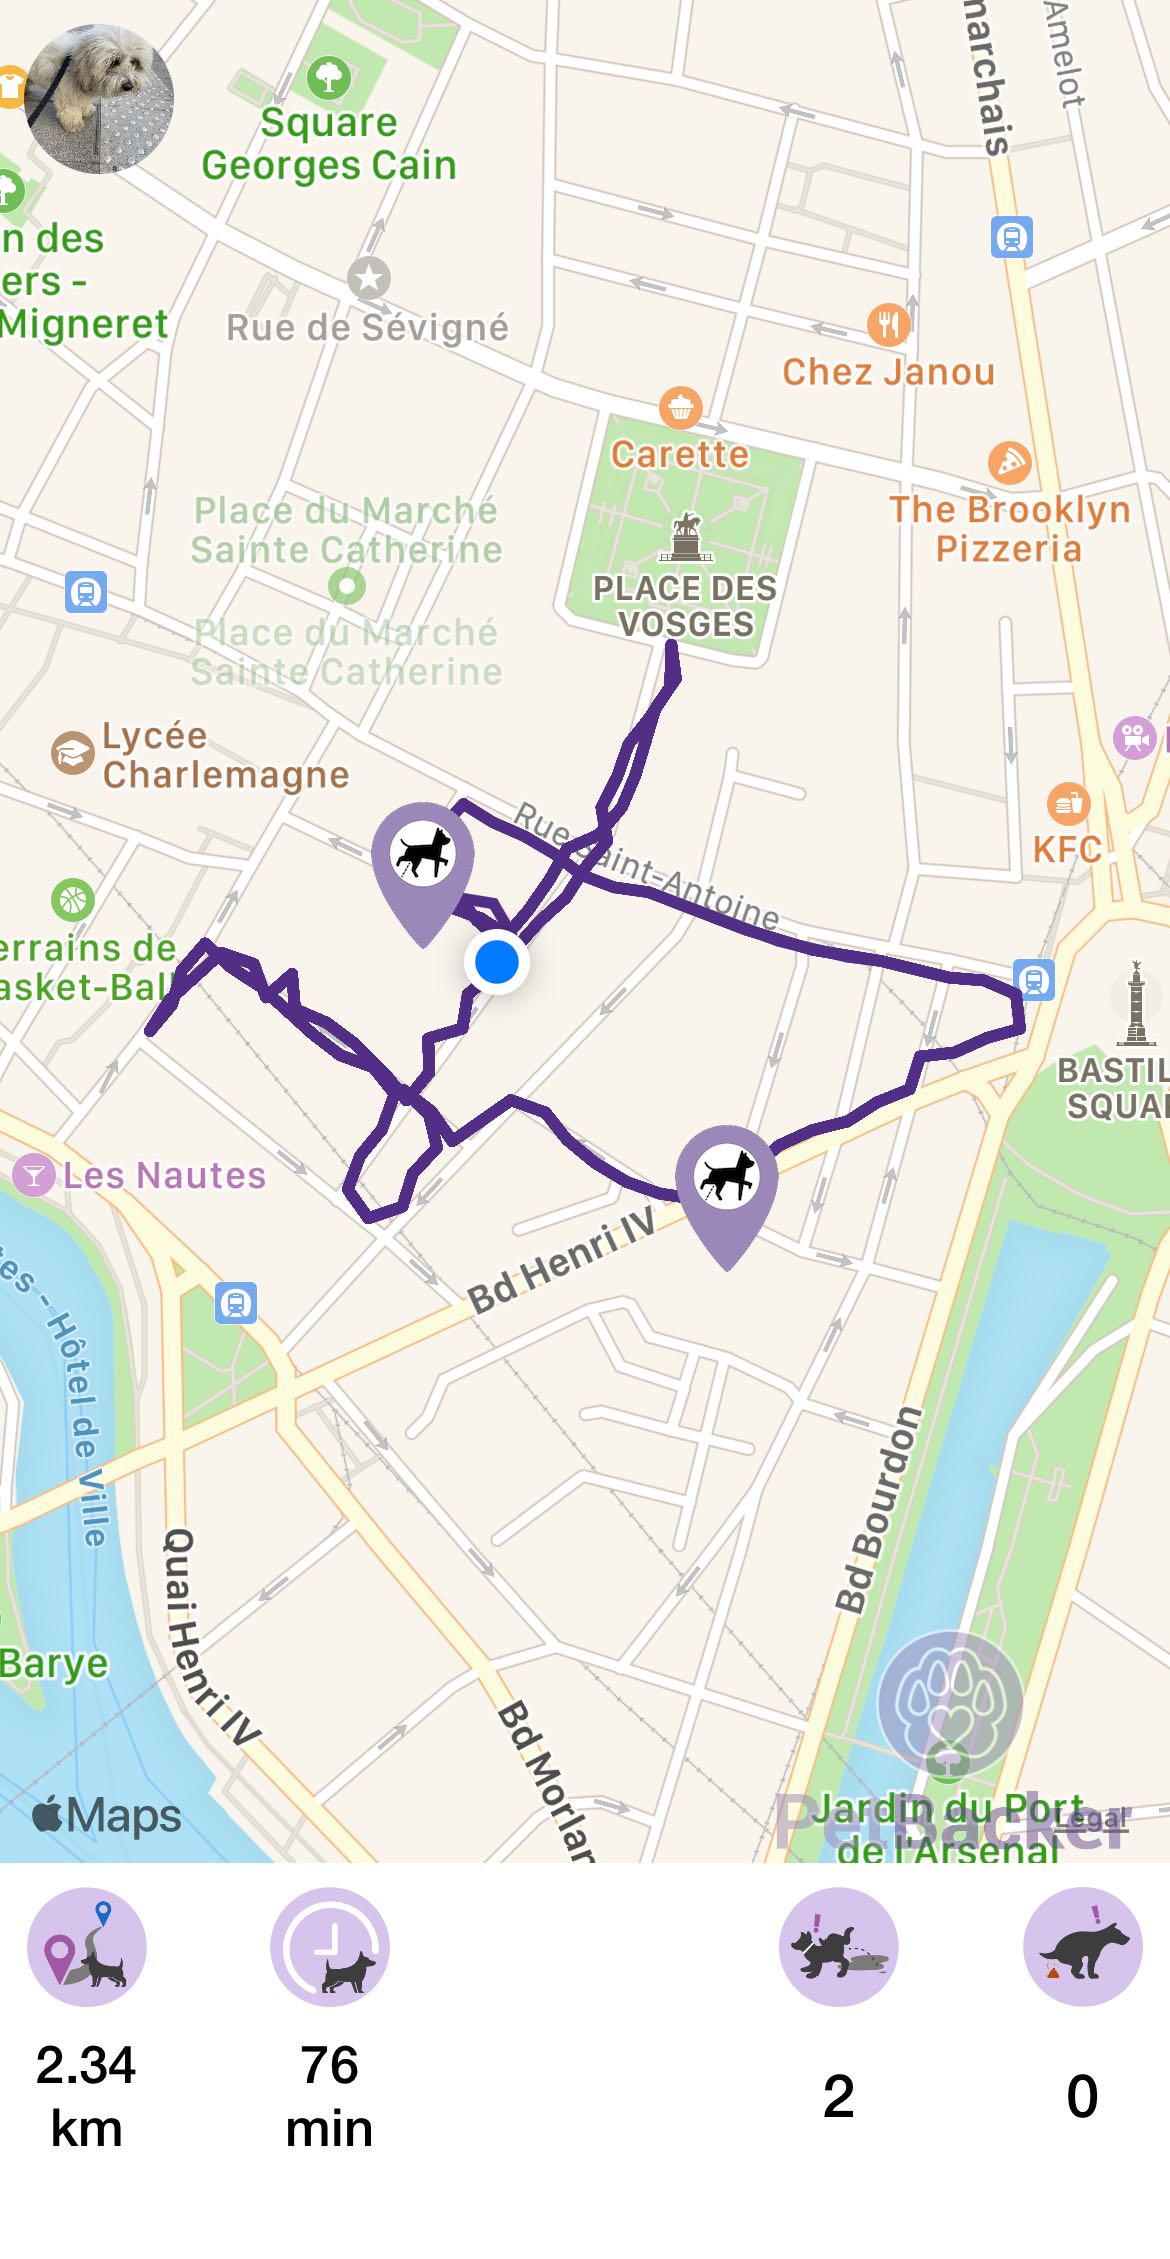 Just completed pet walking of 2.34 km